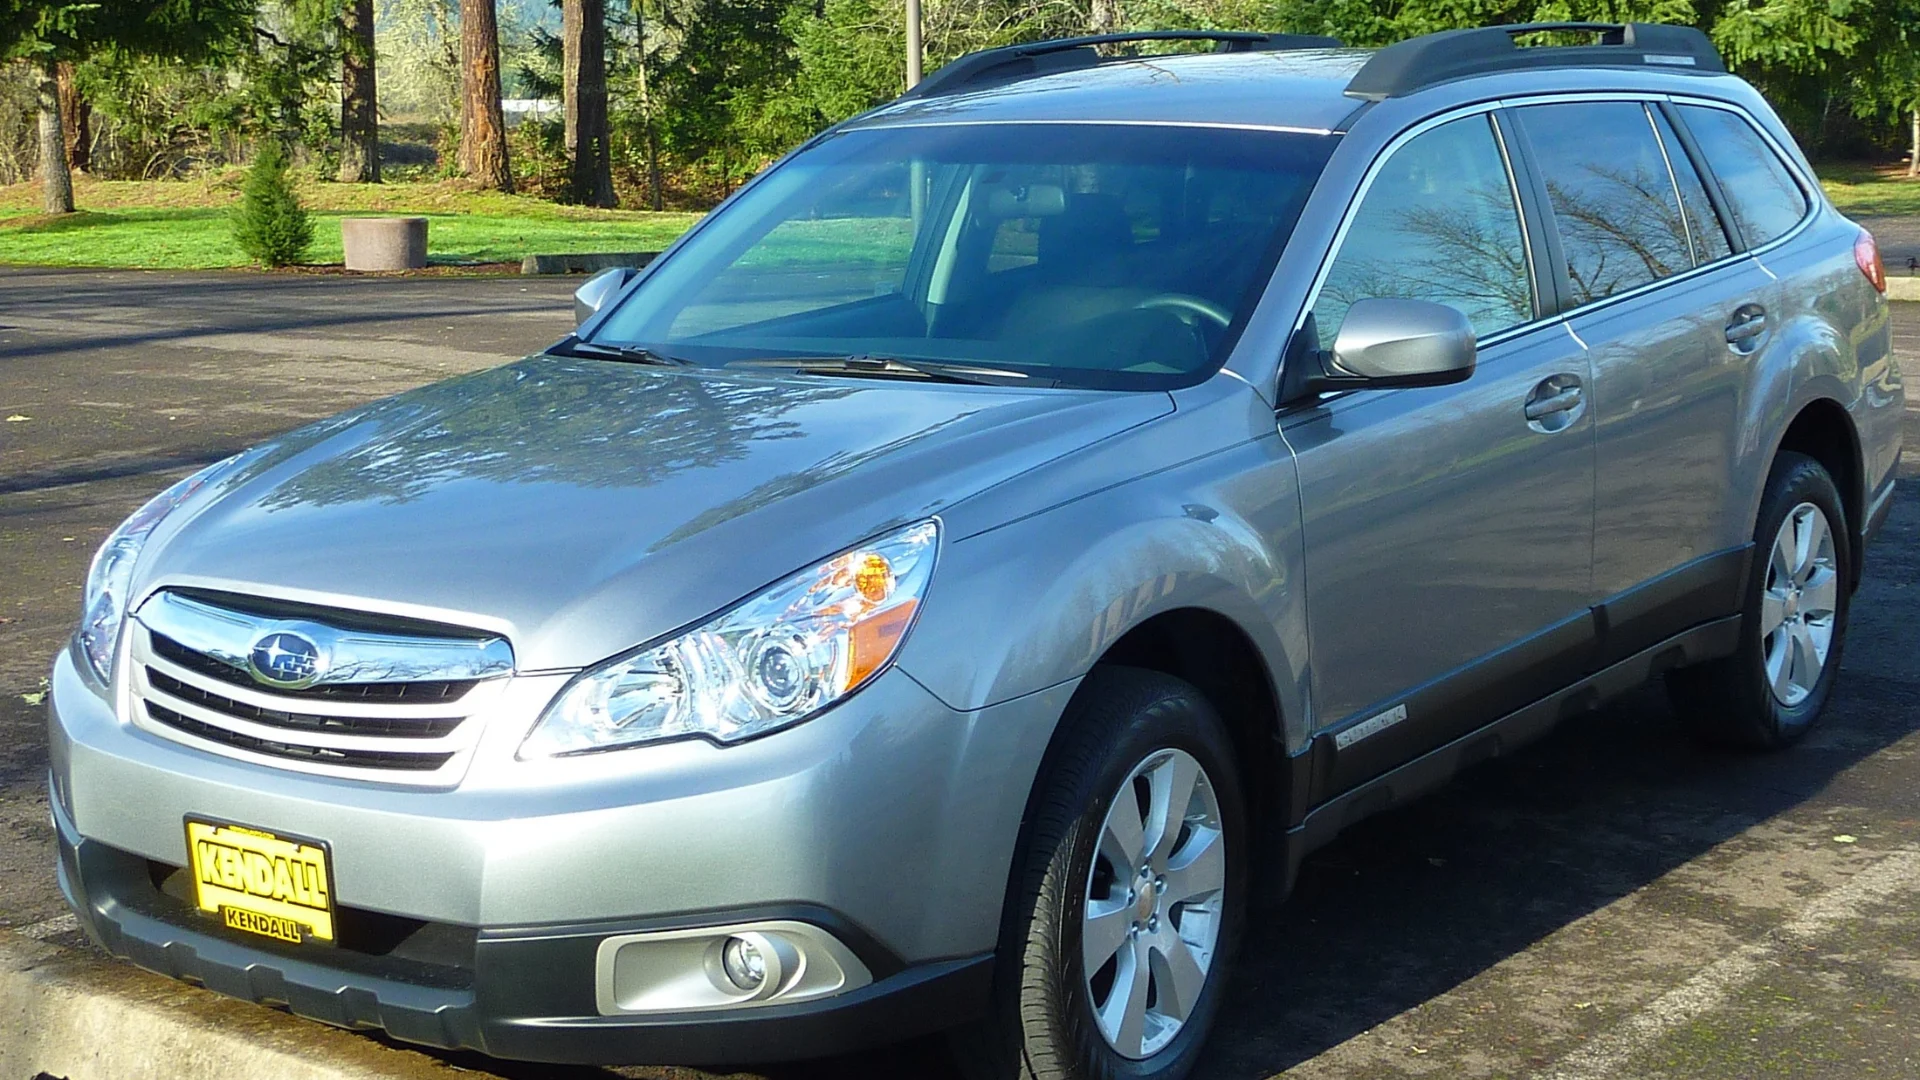 A Subaru Outback is one of the best cars for outdoor enthusiasts